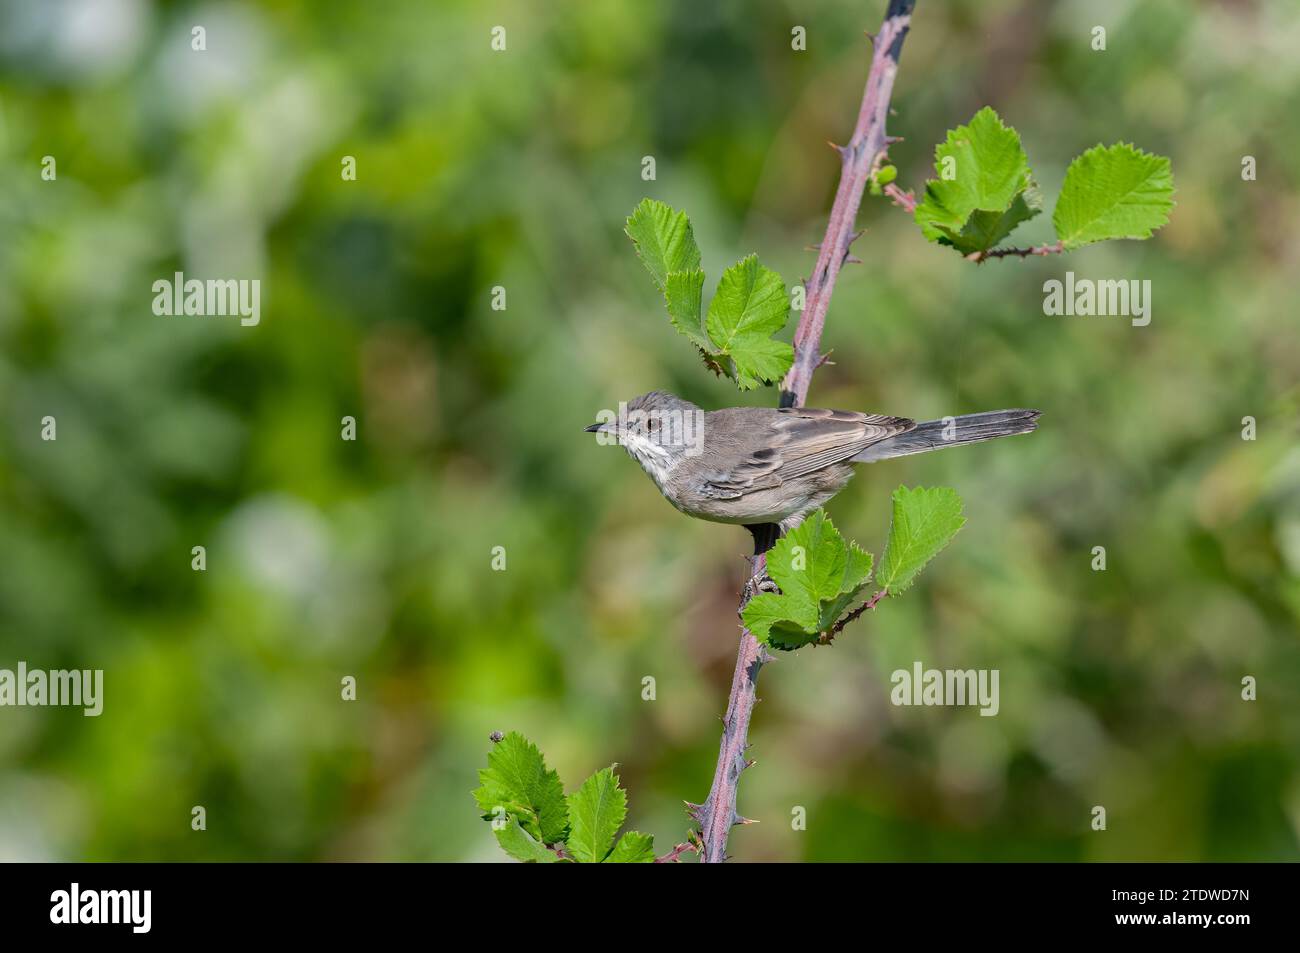 Lesser Whitethroat, Sylvia curruca on a blackberry branch. Blurred background. Stock Photo